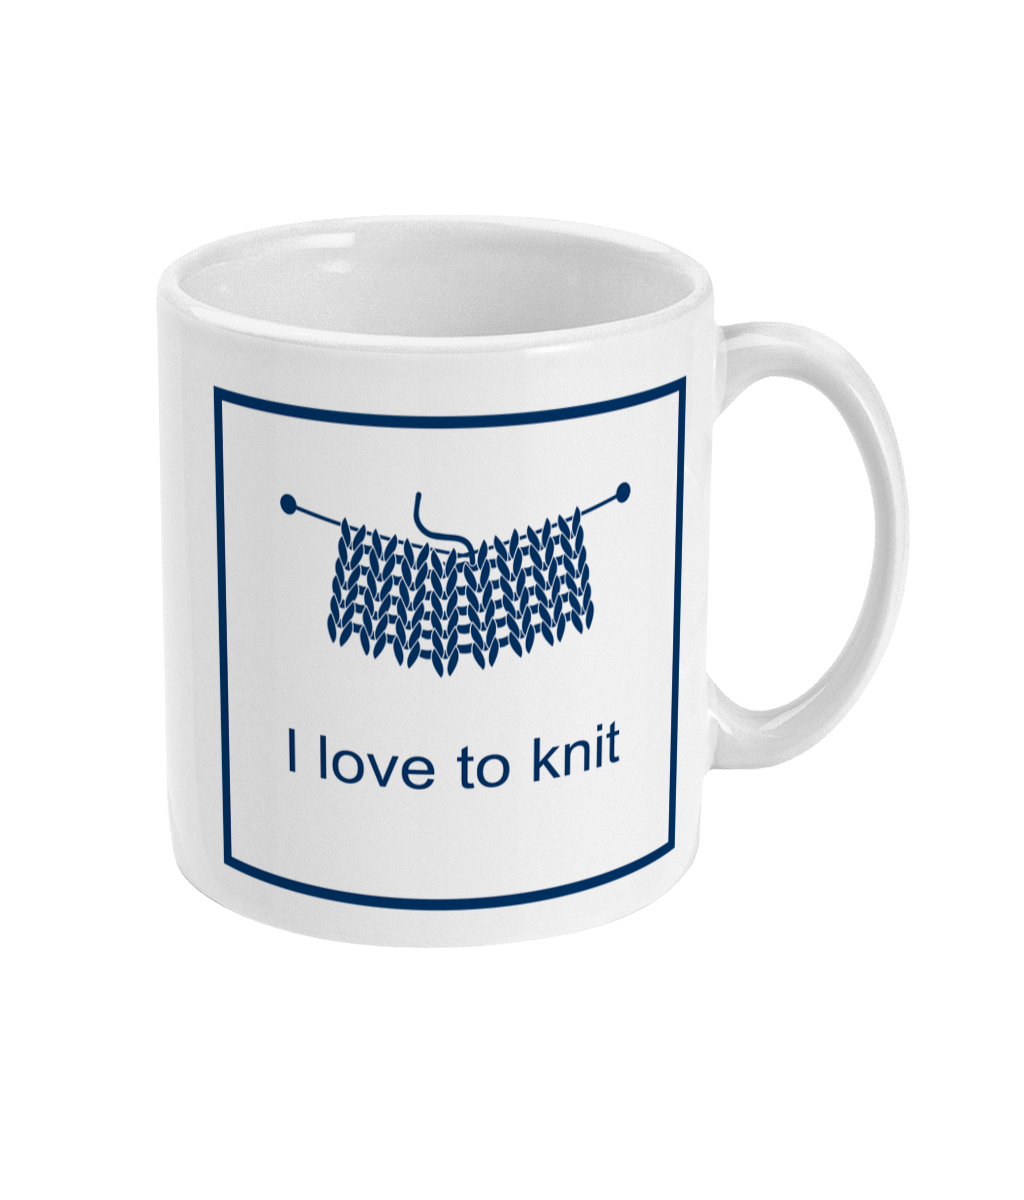 mug with I love to knit printed on it